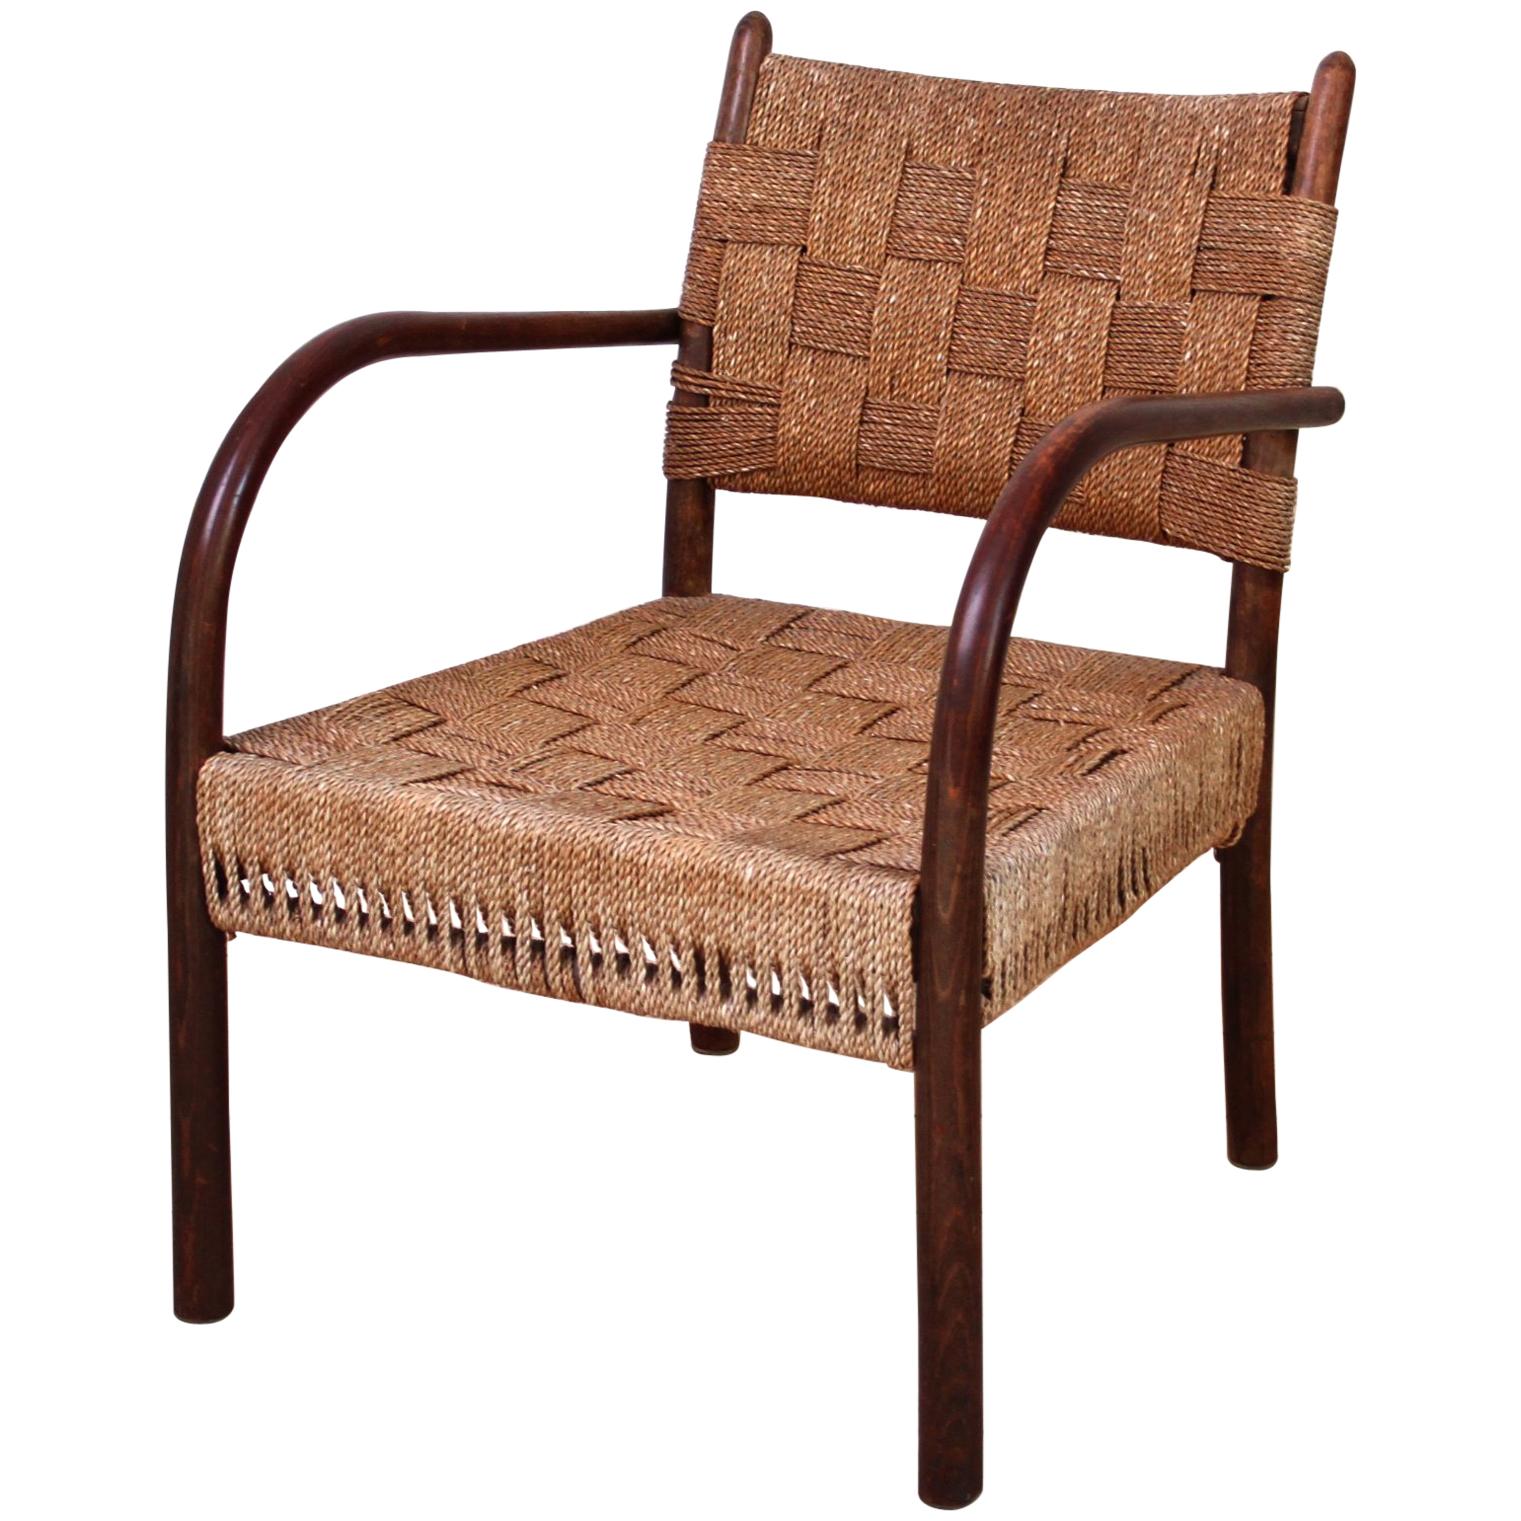 K. Scröder Armchair, Stained Beech and Woven Seagrass, 1930s